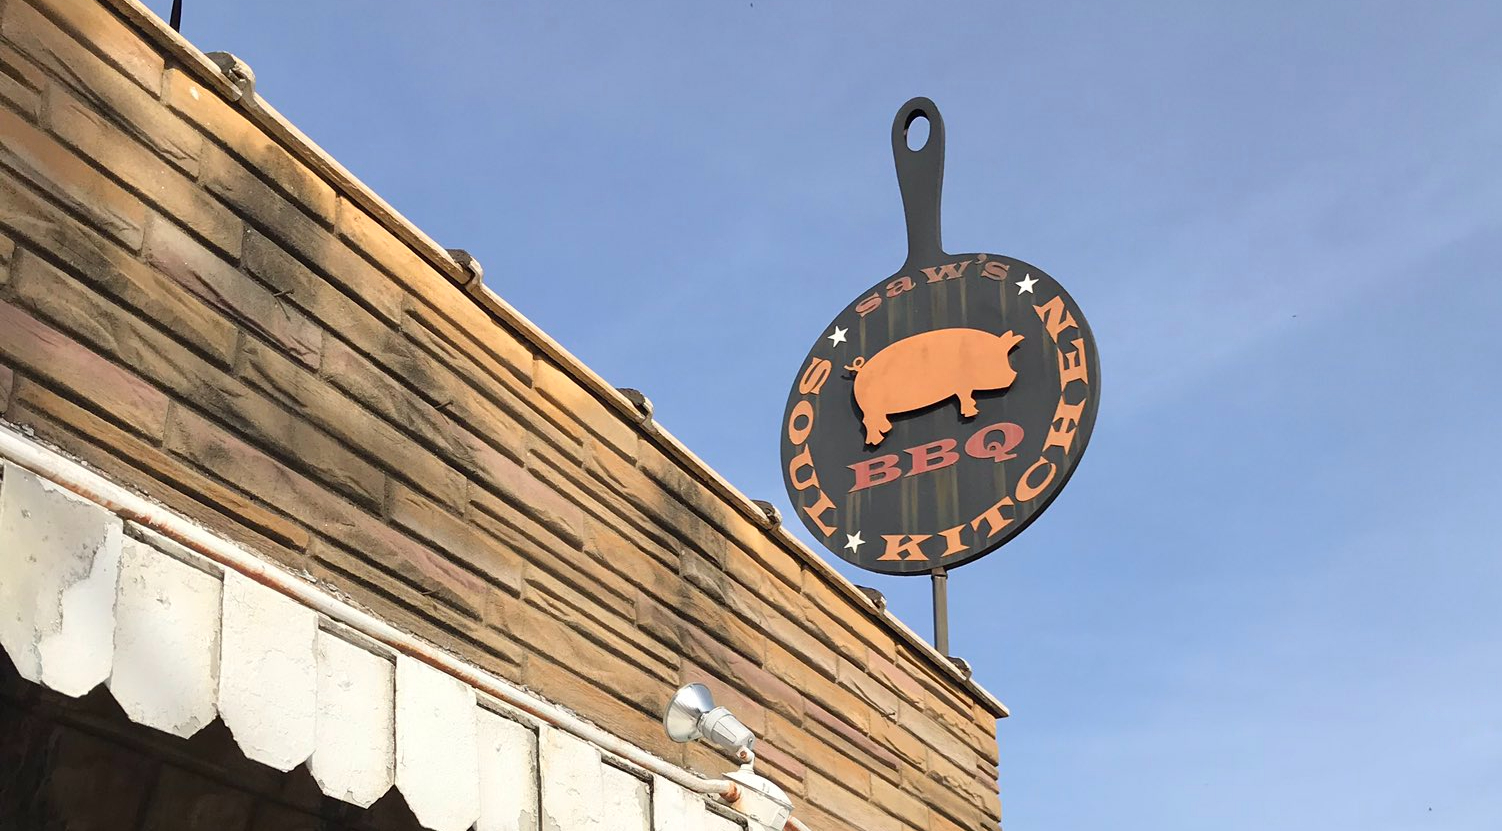 Saw's BBQ eyeing Trussville expansion after Hoover opening